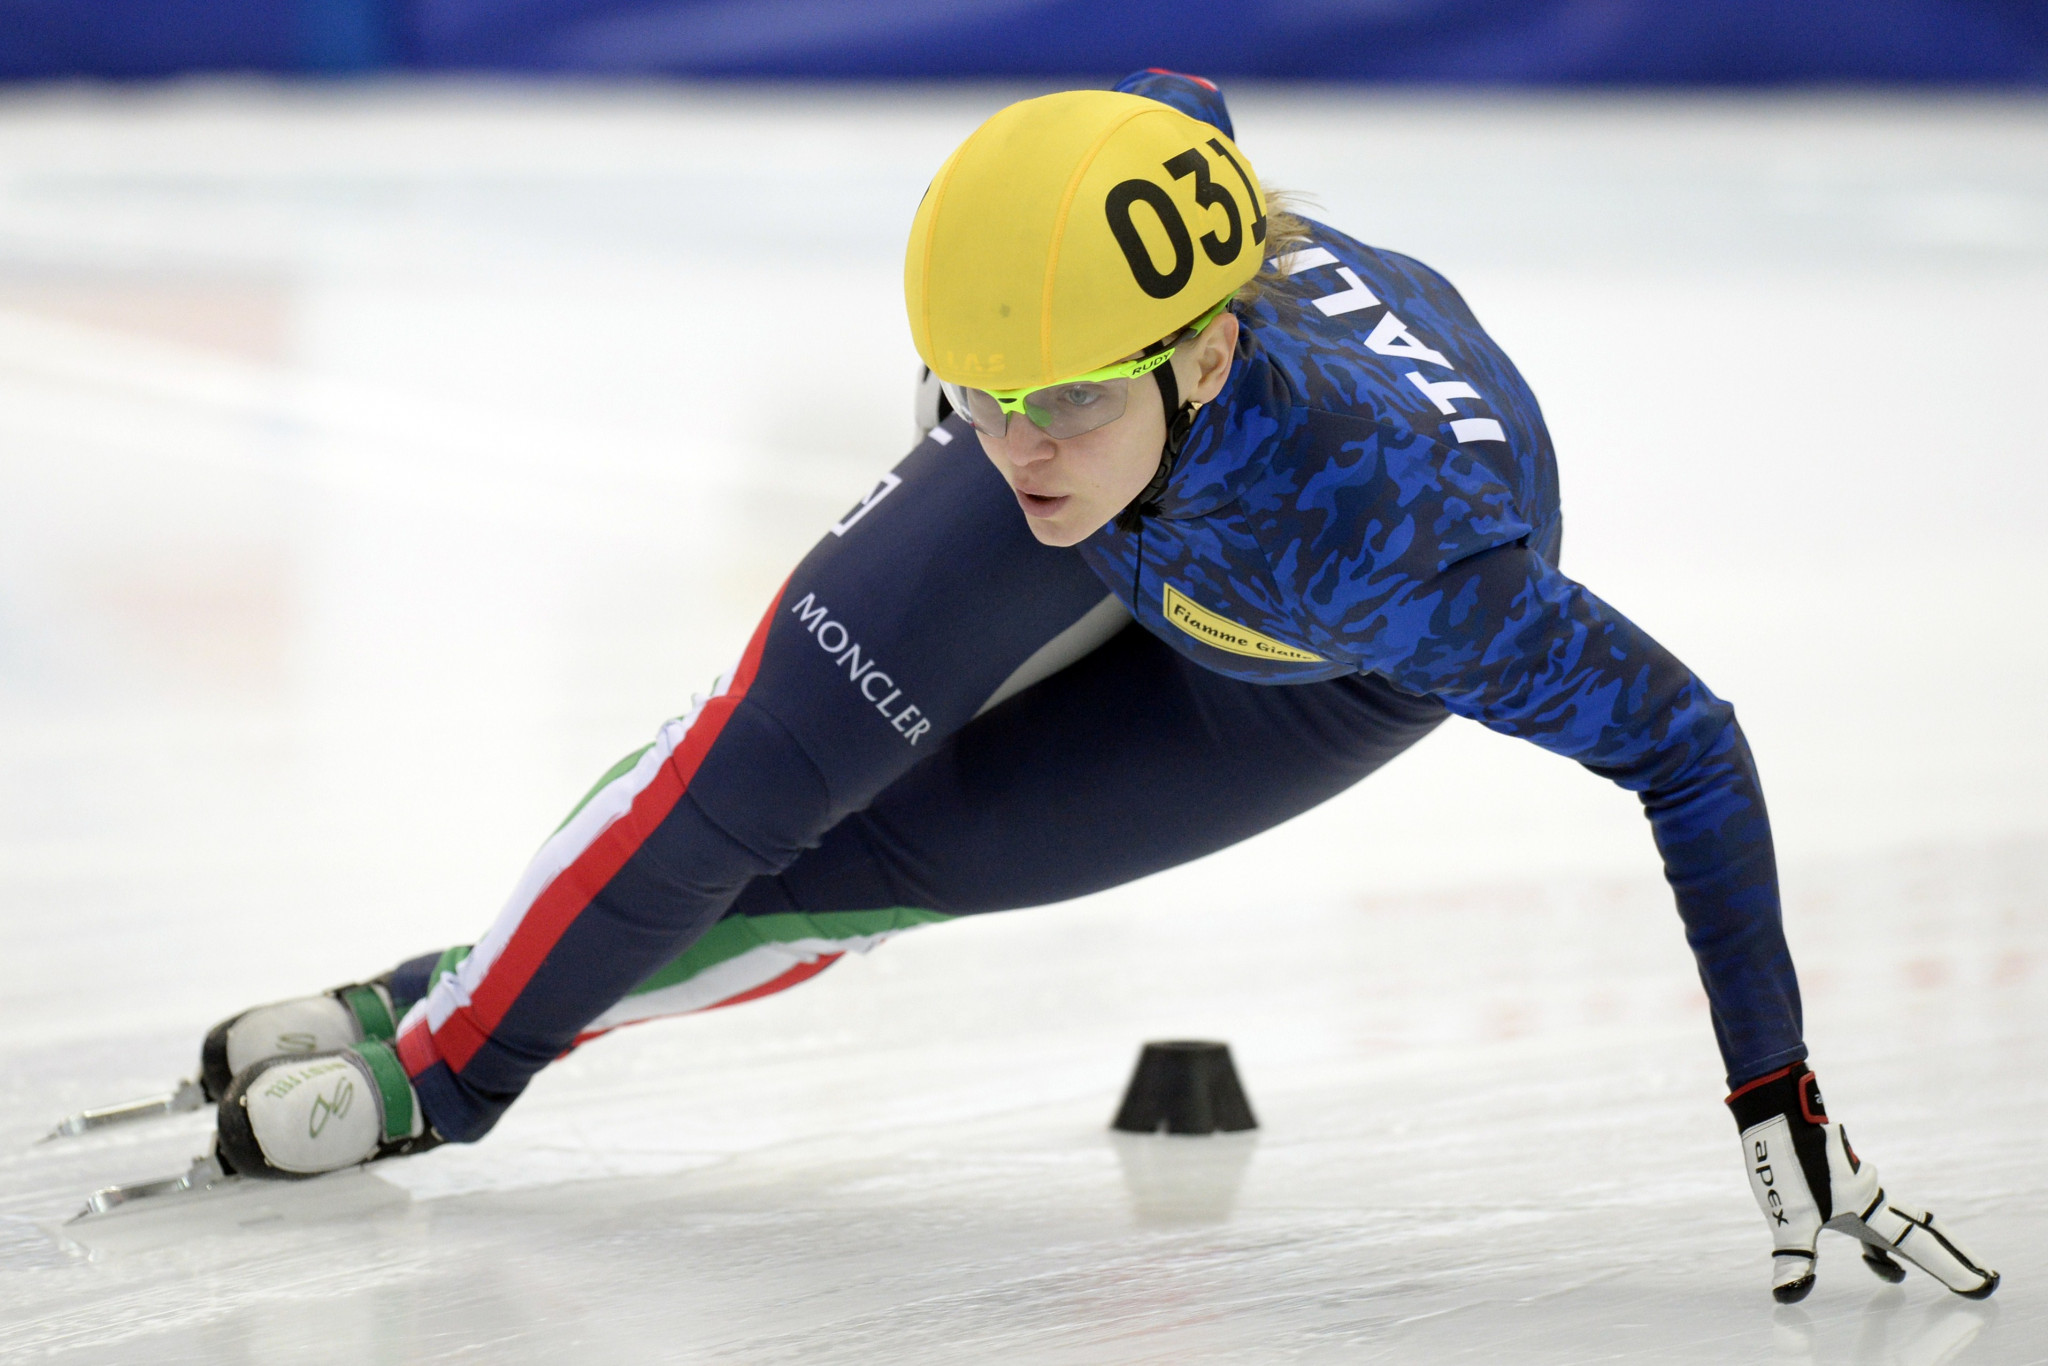 Italian skater Arianna Fontana is among the athletes hoping to capitalise on Elise Christie's absence ©Getty Images